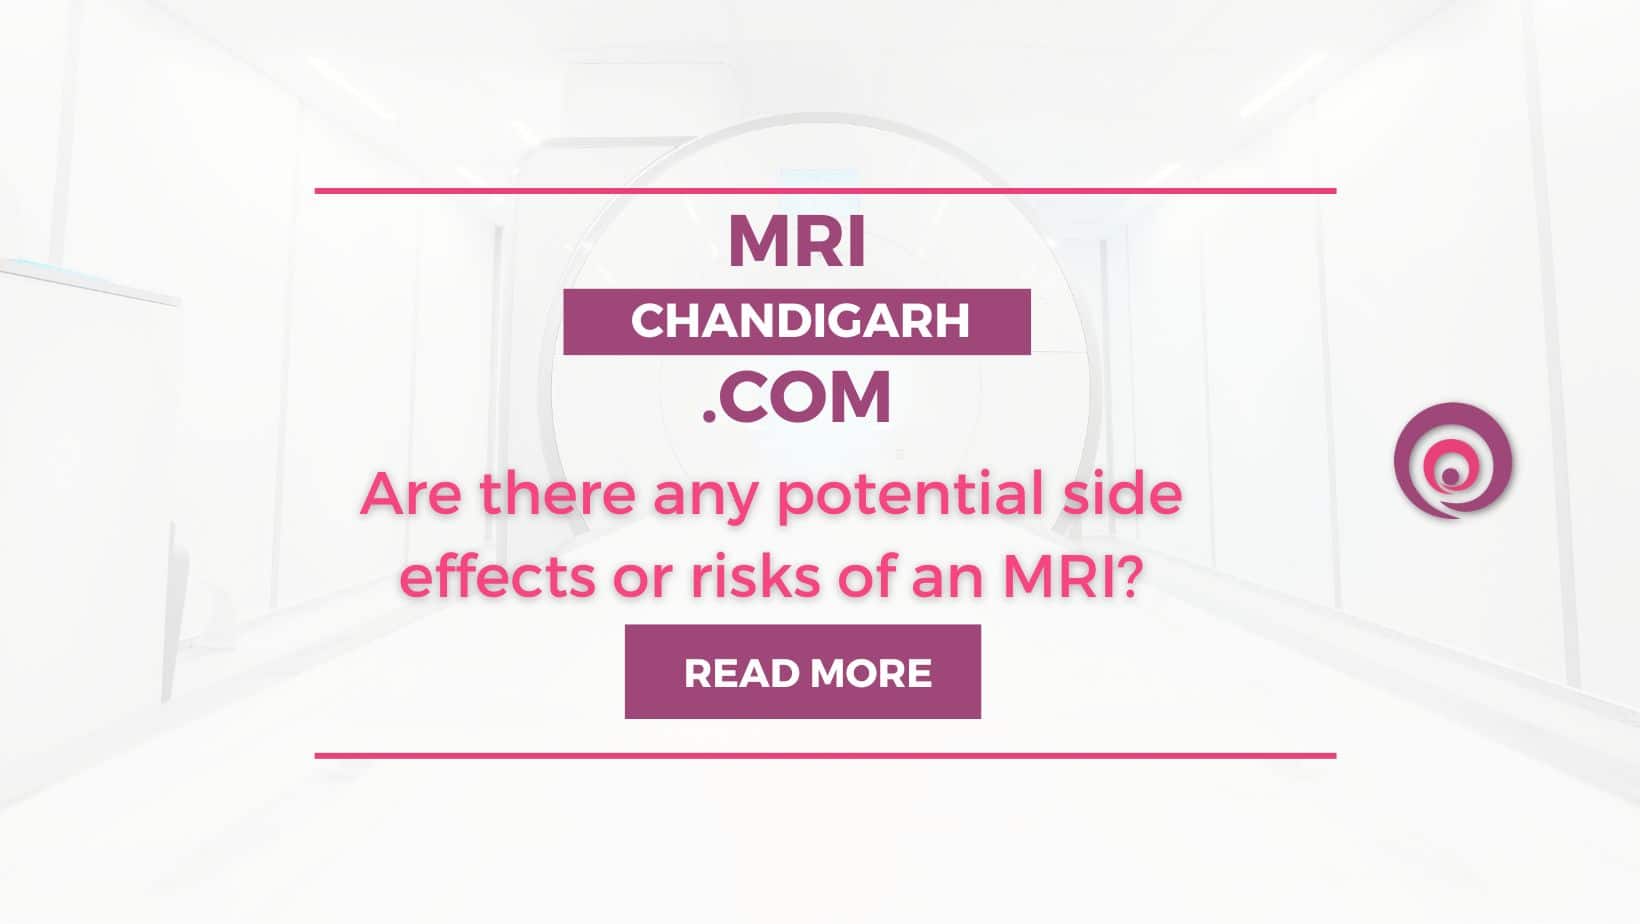 Are there any potential side effects or risks of an MRI?